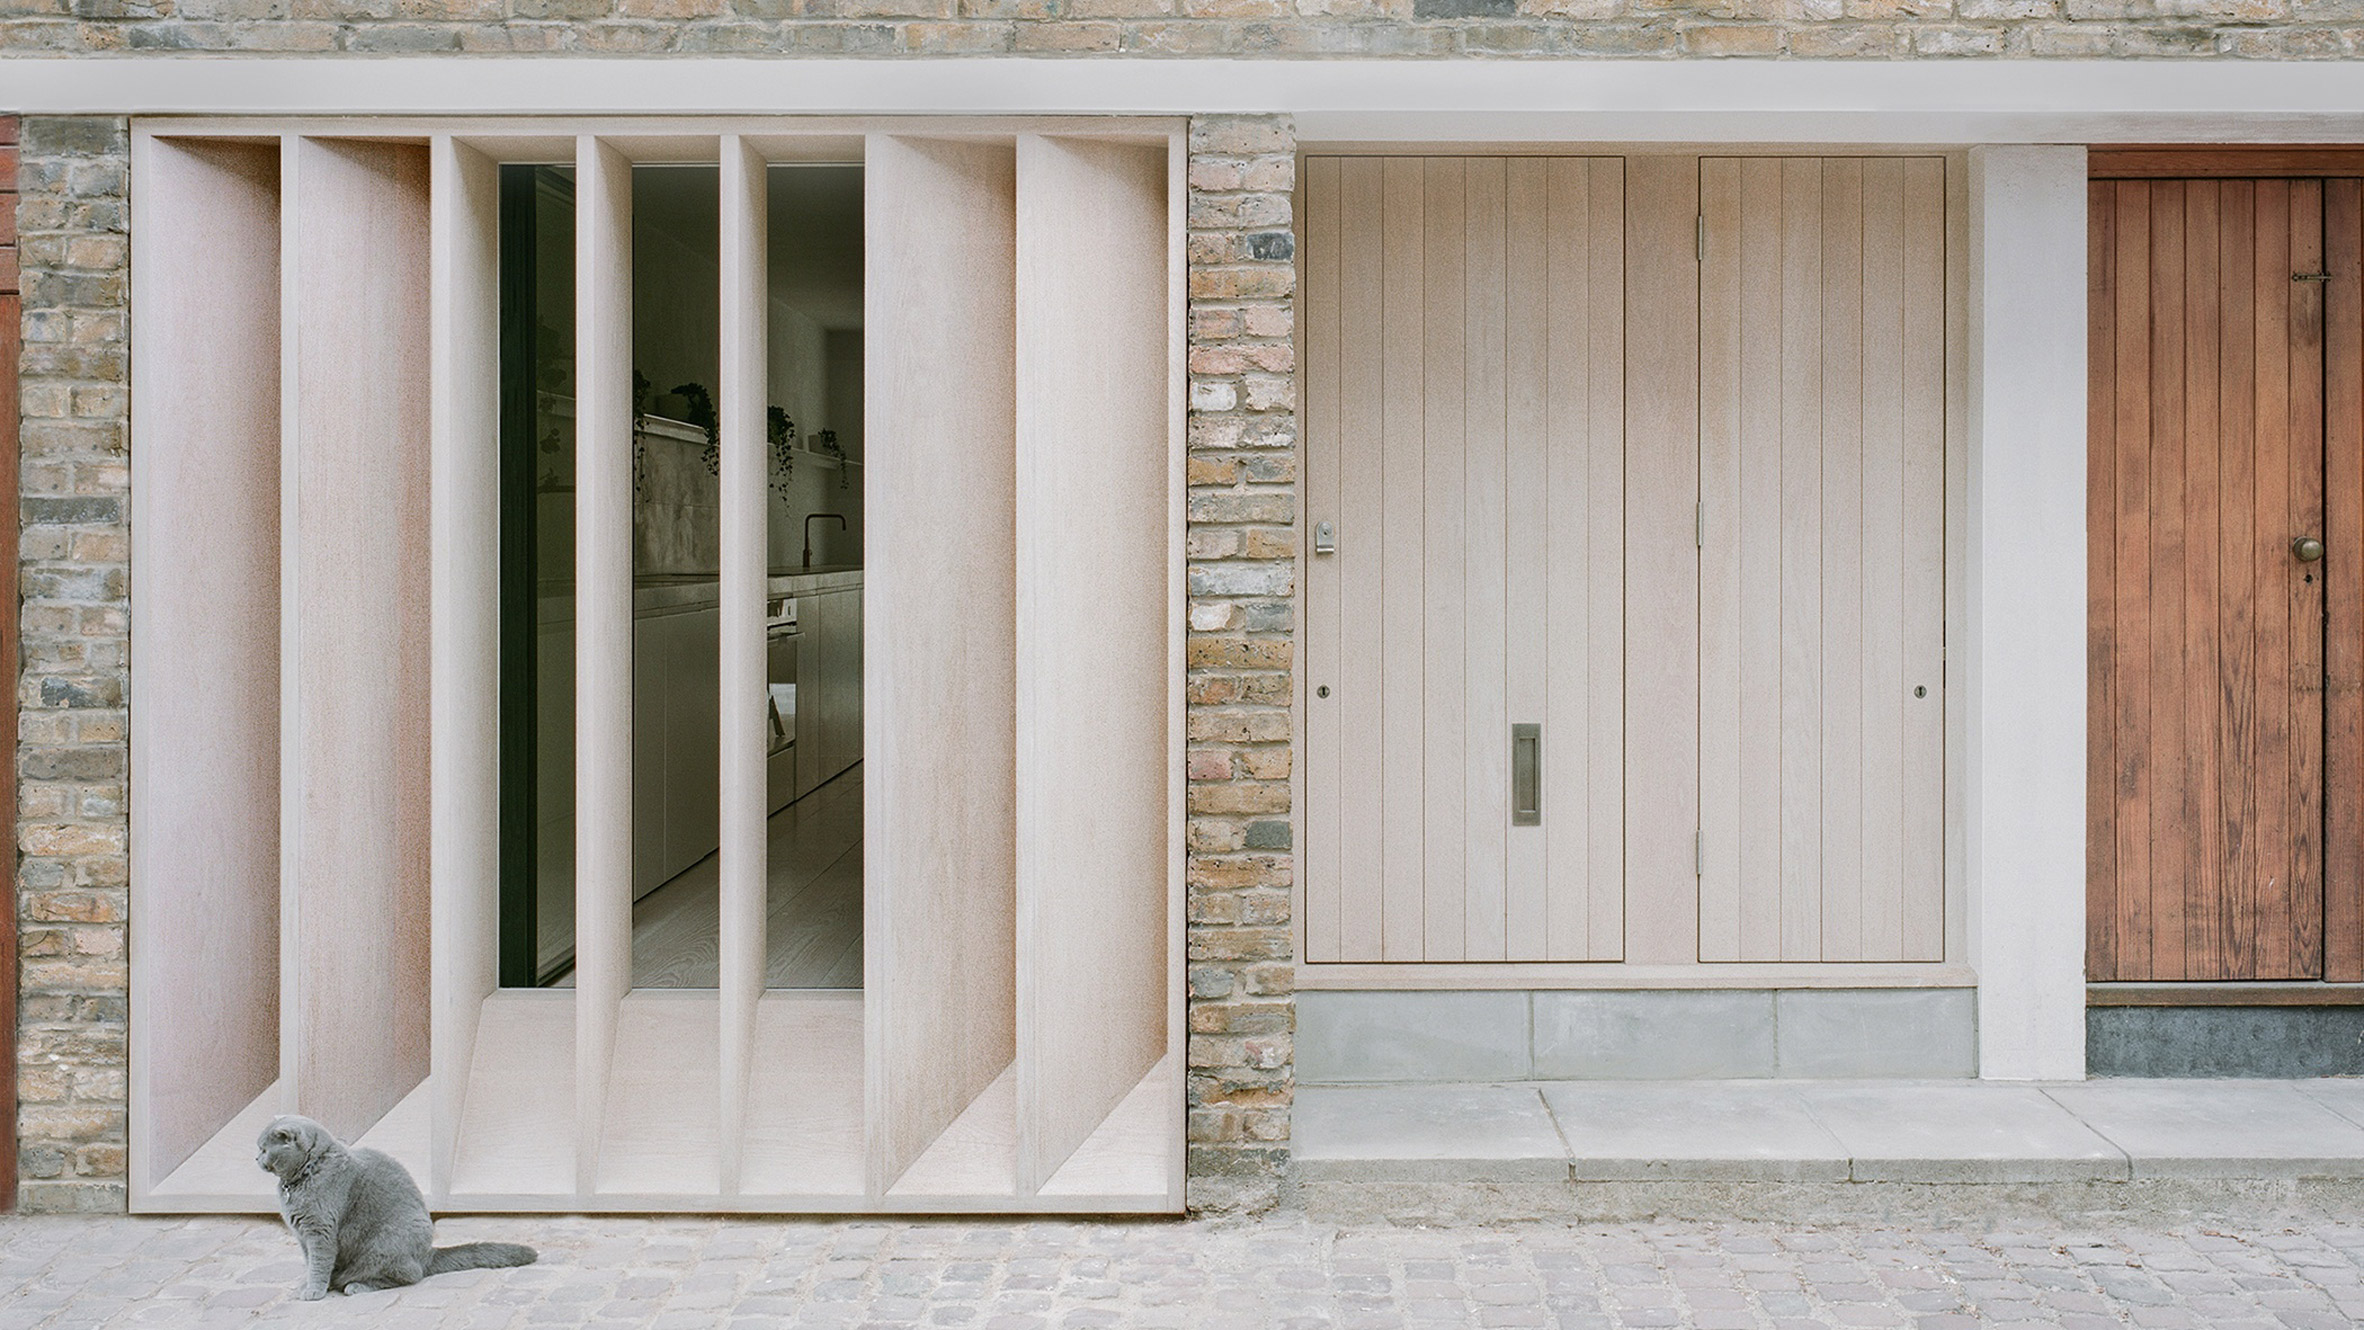 Trewhela Williams adds louvred oak facade to London mews house